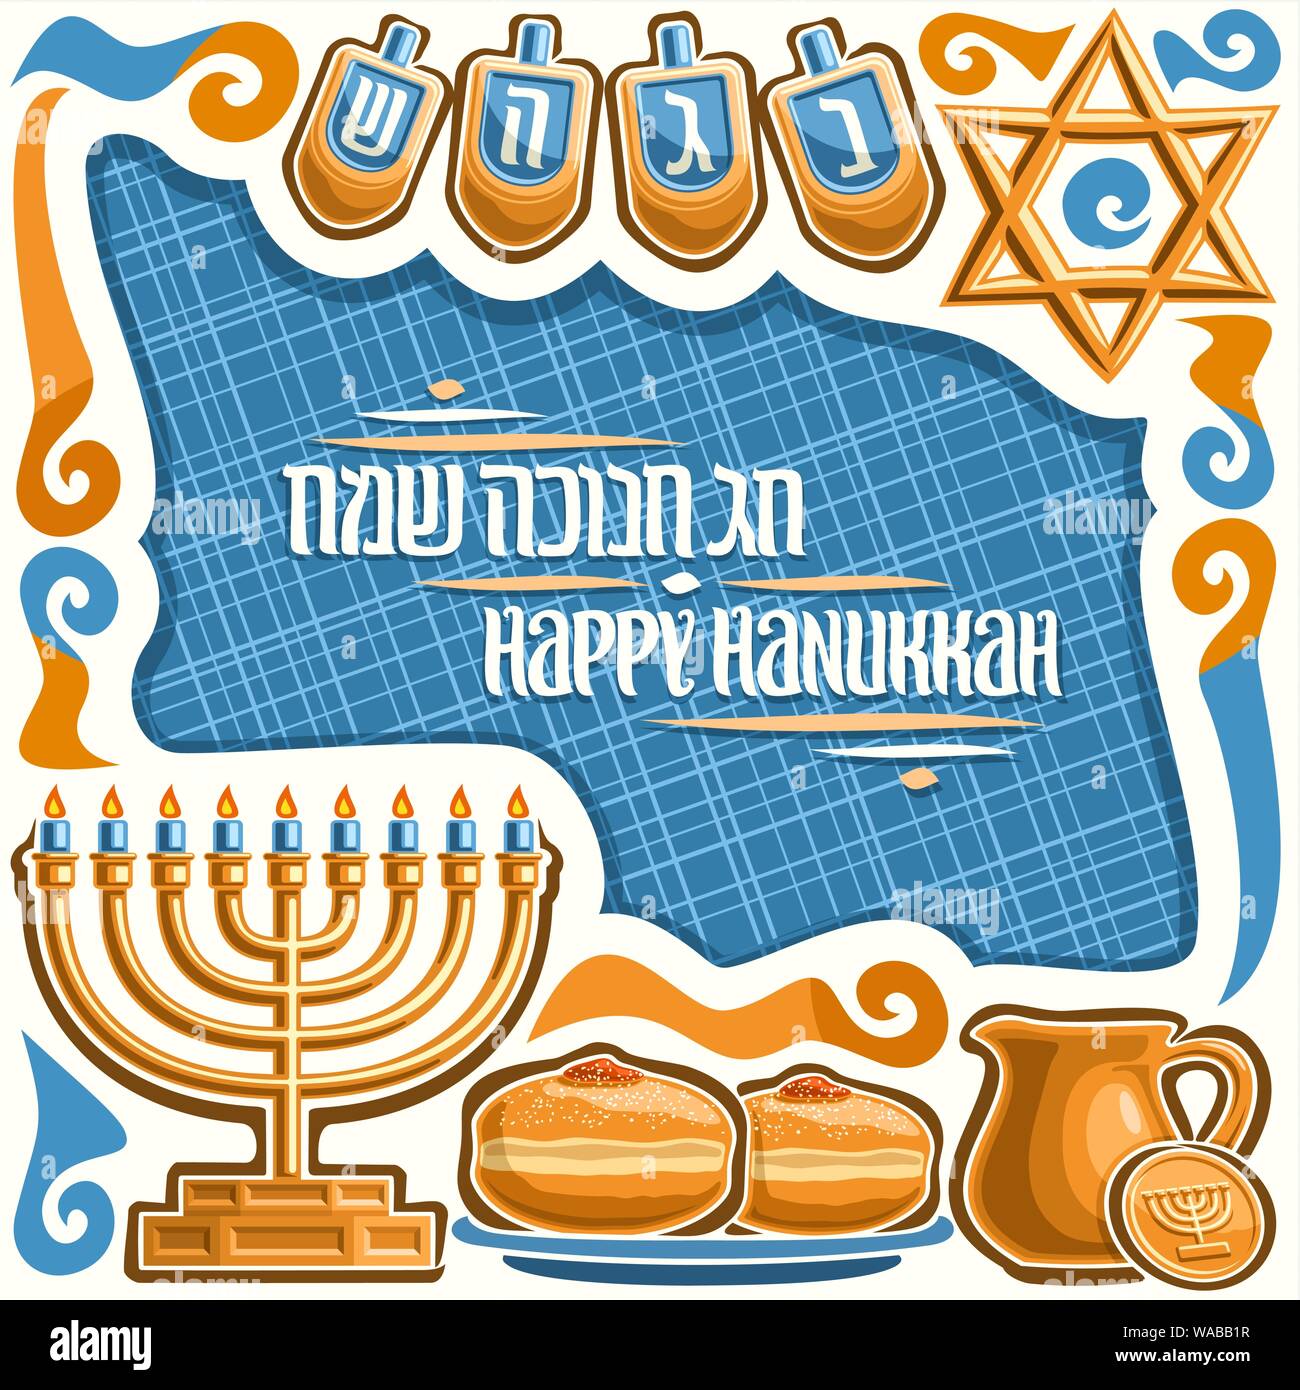 Vector poster for Hanukkah holiday, white frame with 4 traditional spinning kids toys - sevivon, gold star of David, hanukkah candelabra, donuts with Stock Vector